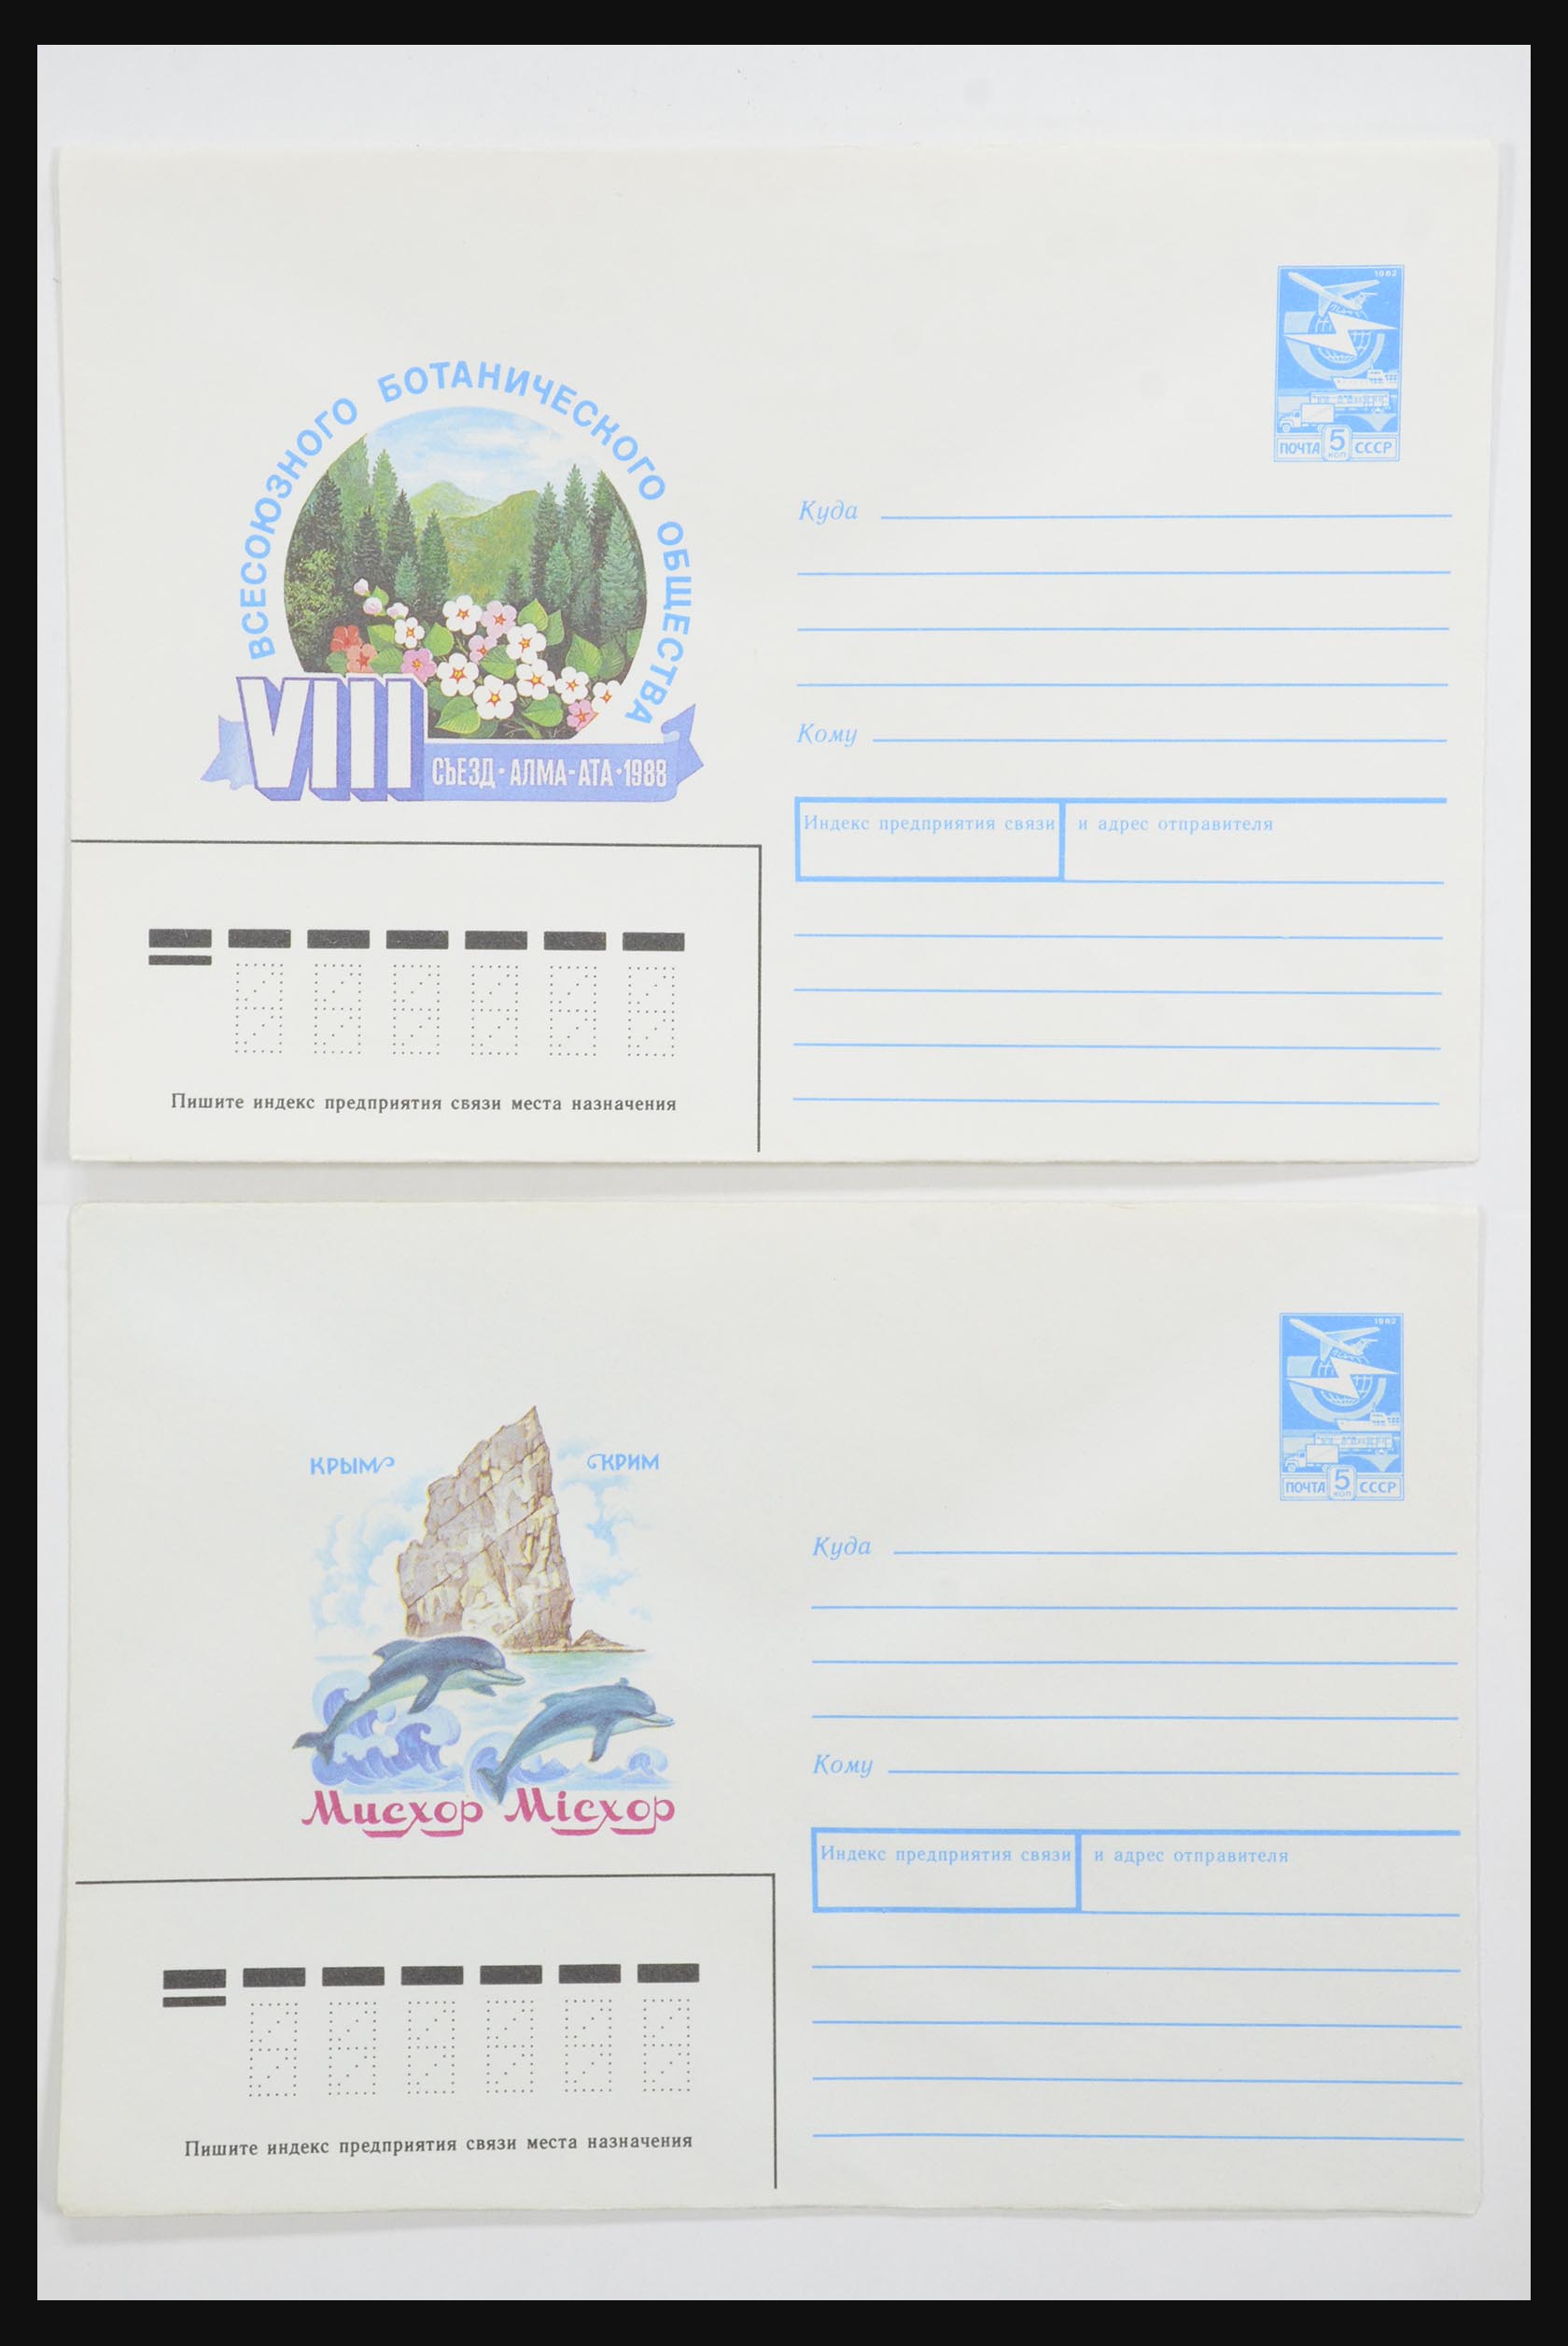 31928 0052 - 31928 Eastern Europe covers 1960's-1990's.